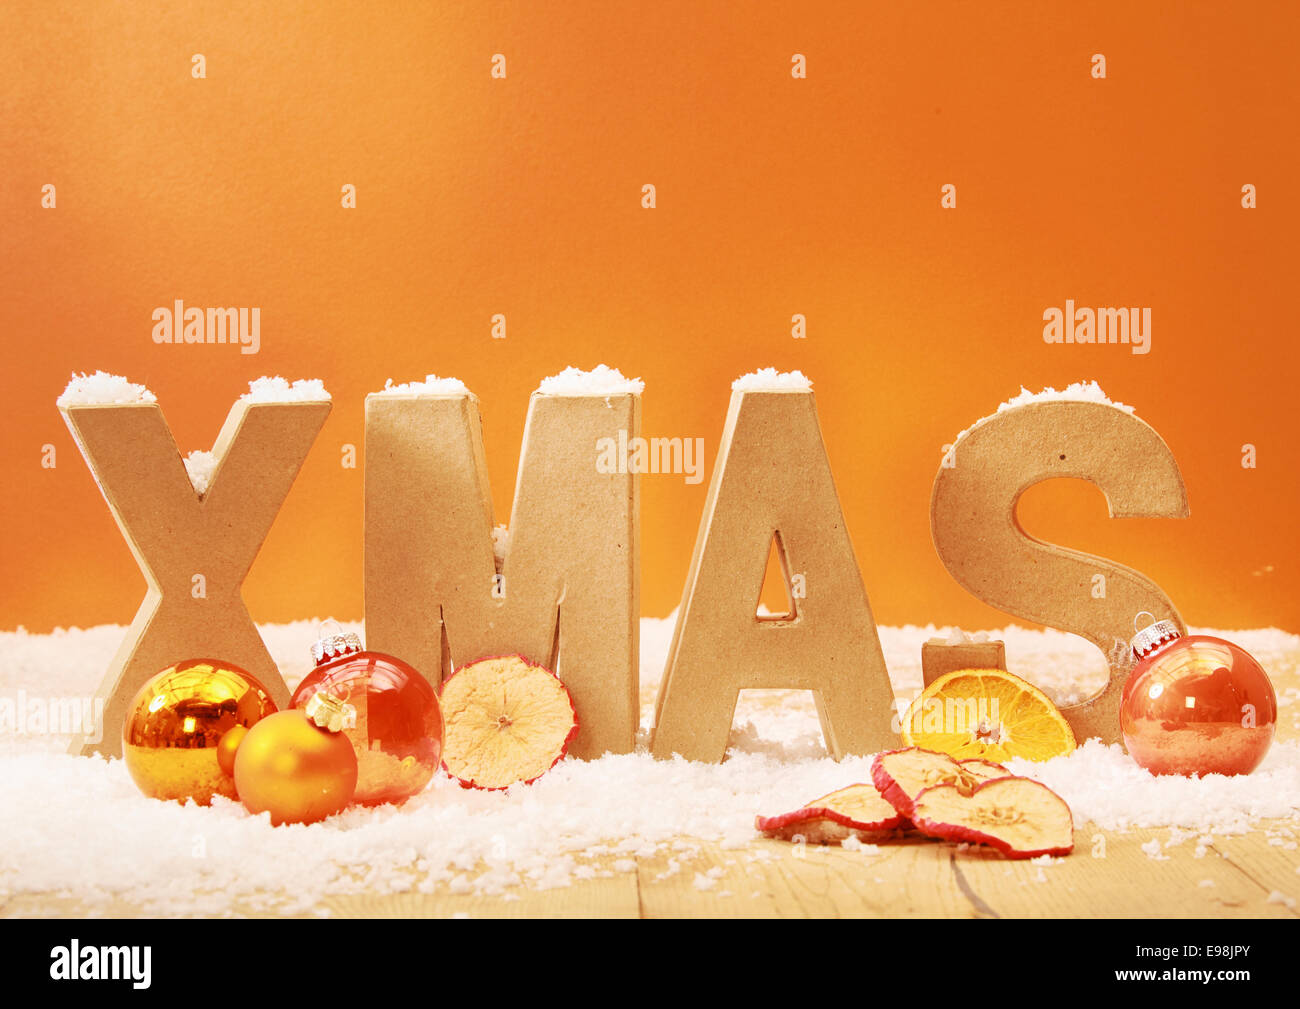 Warm toned Xmas background with wooden letters for Xmas in snow with orange and gold decorations and dried apple and orange slices against an orange background with copyspace Stock Photo